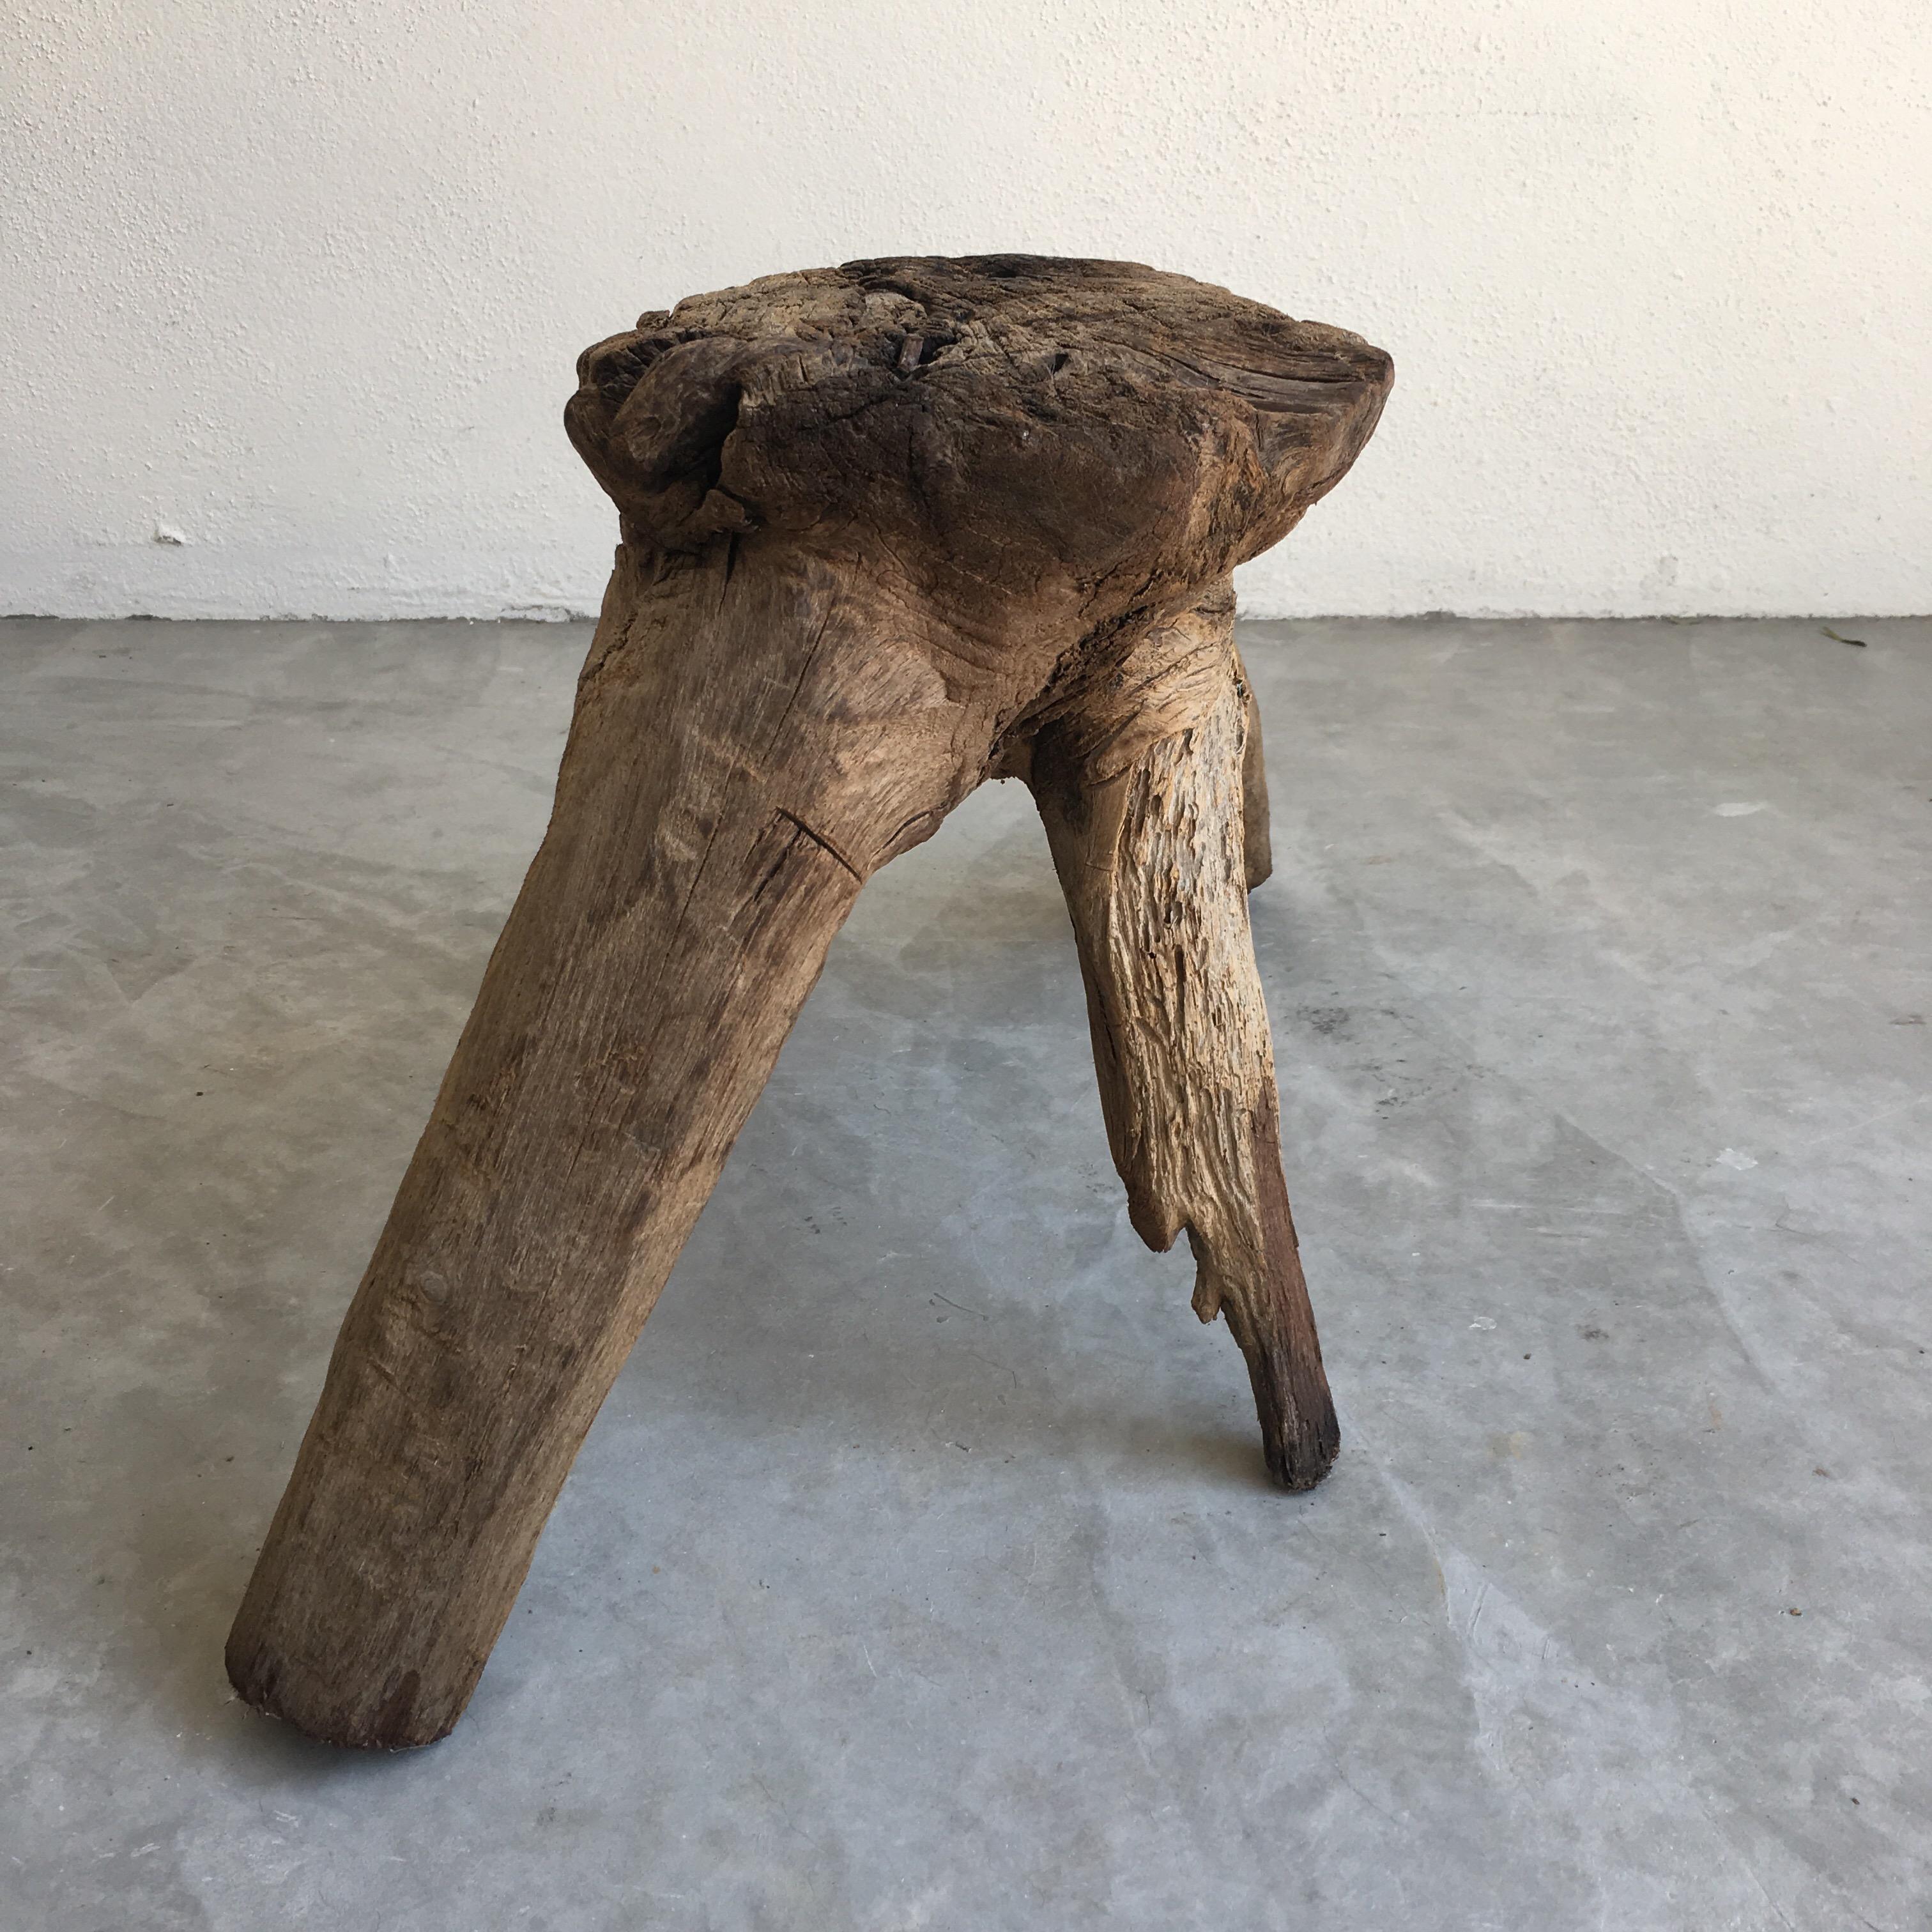 Primitive hardwood mesquite stool from the Sierra Gorda region of Mexico. Rare four legged item. One of a kind piece.